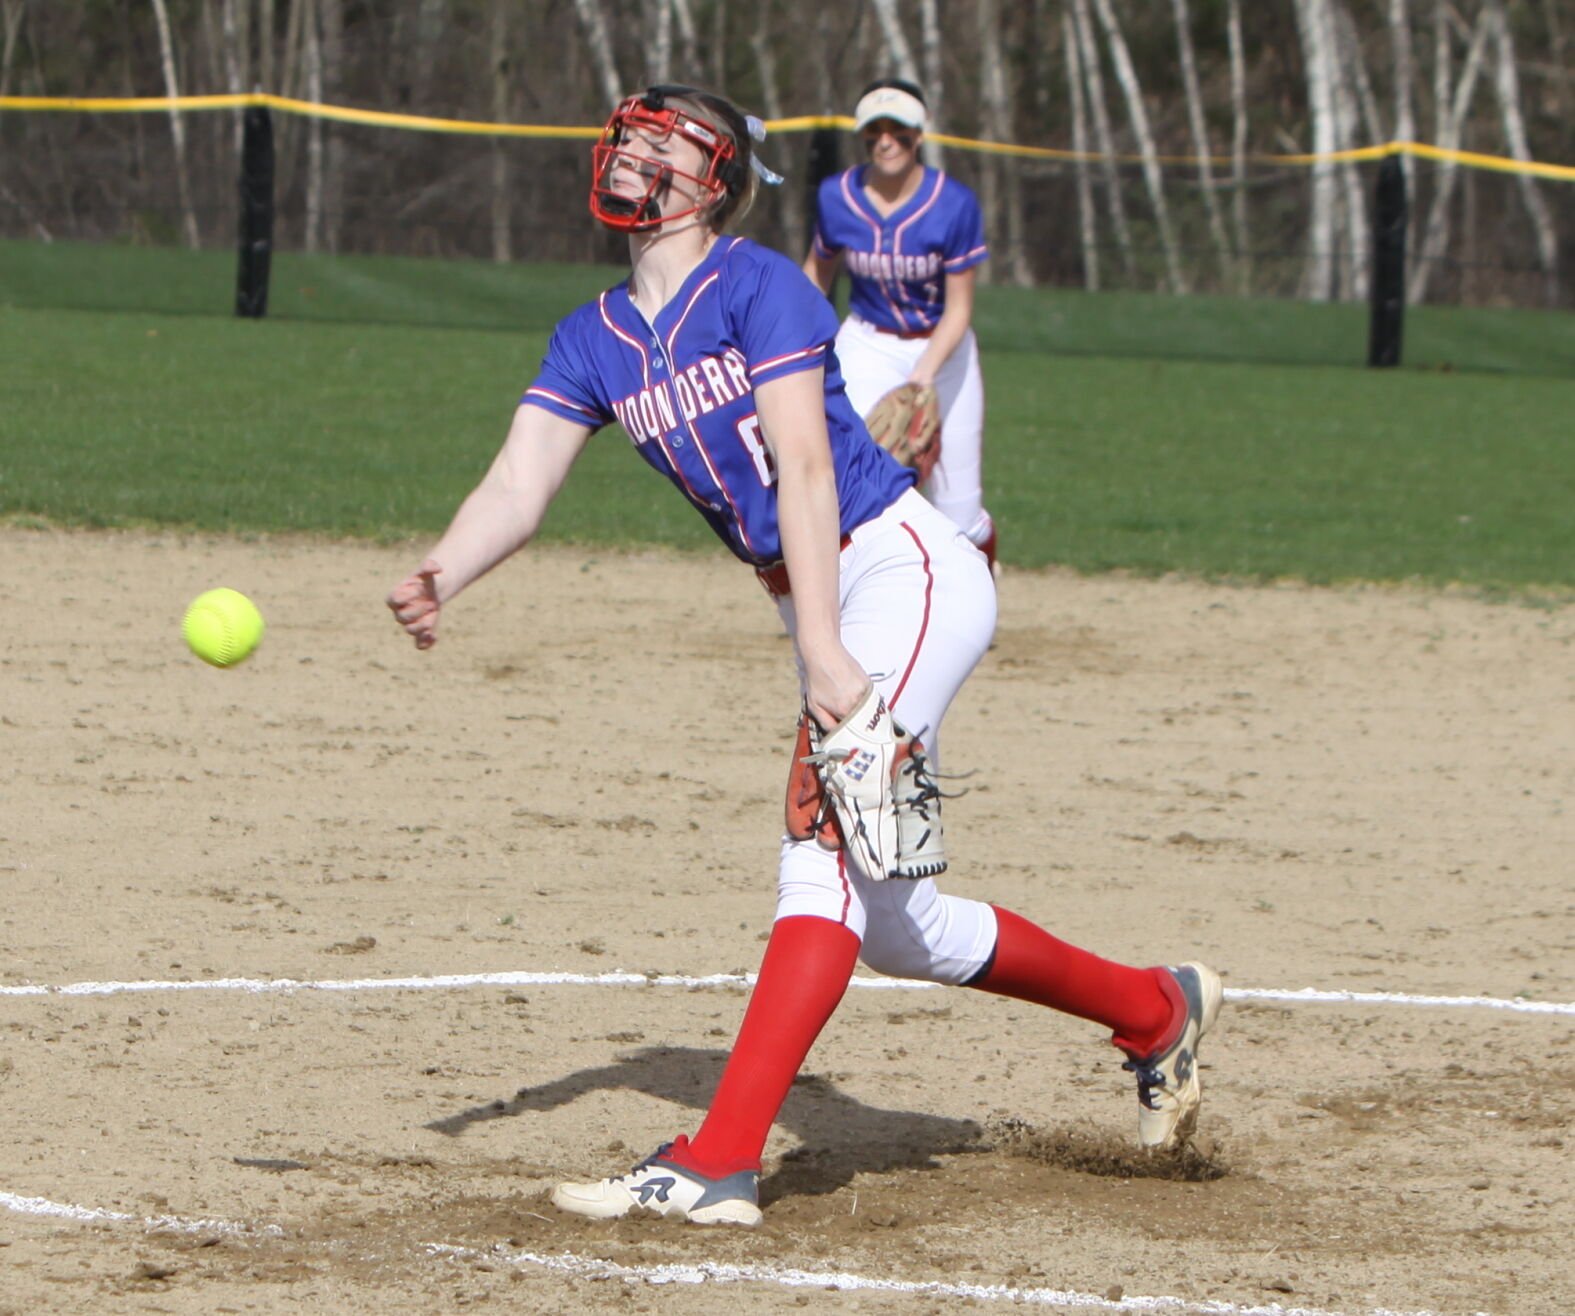 Impressive Sophomore Kearney Leads Londonderry High Softball to 3-0 Start with 65 mph Throws